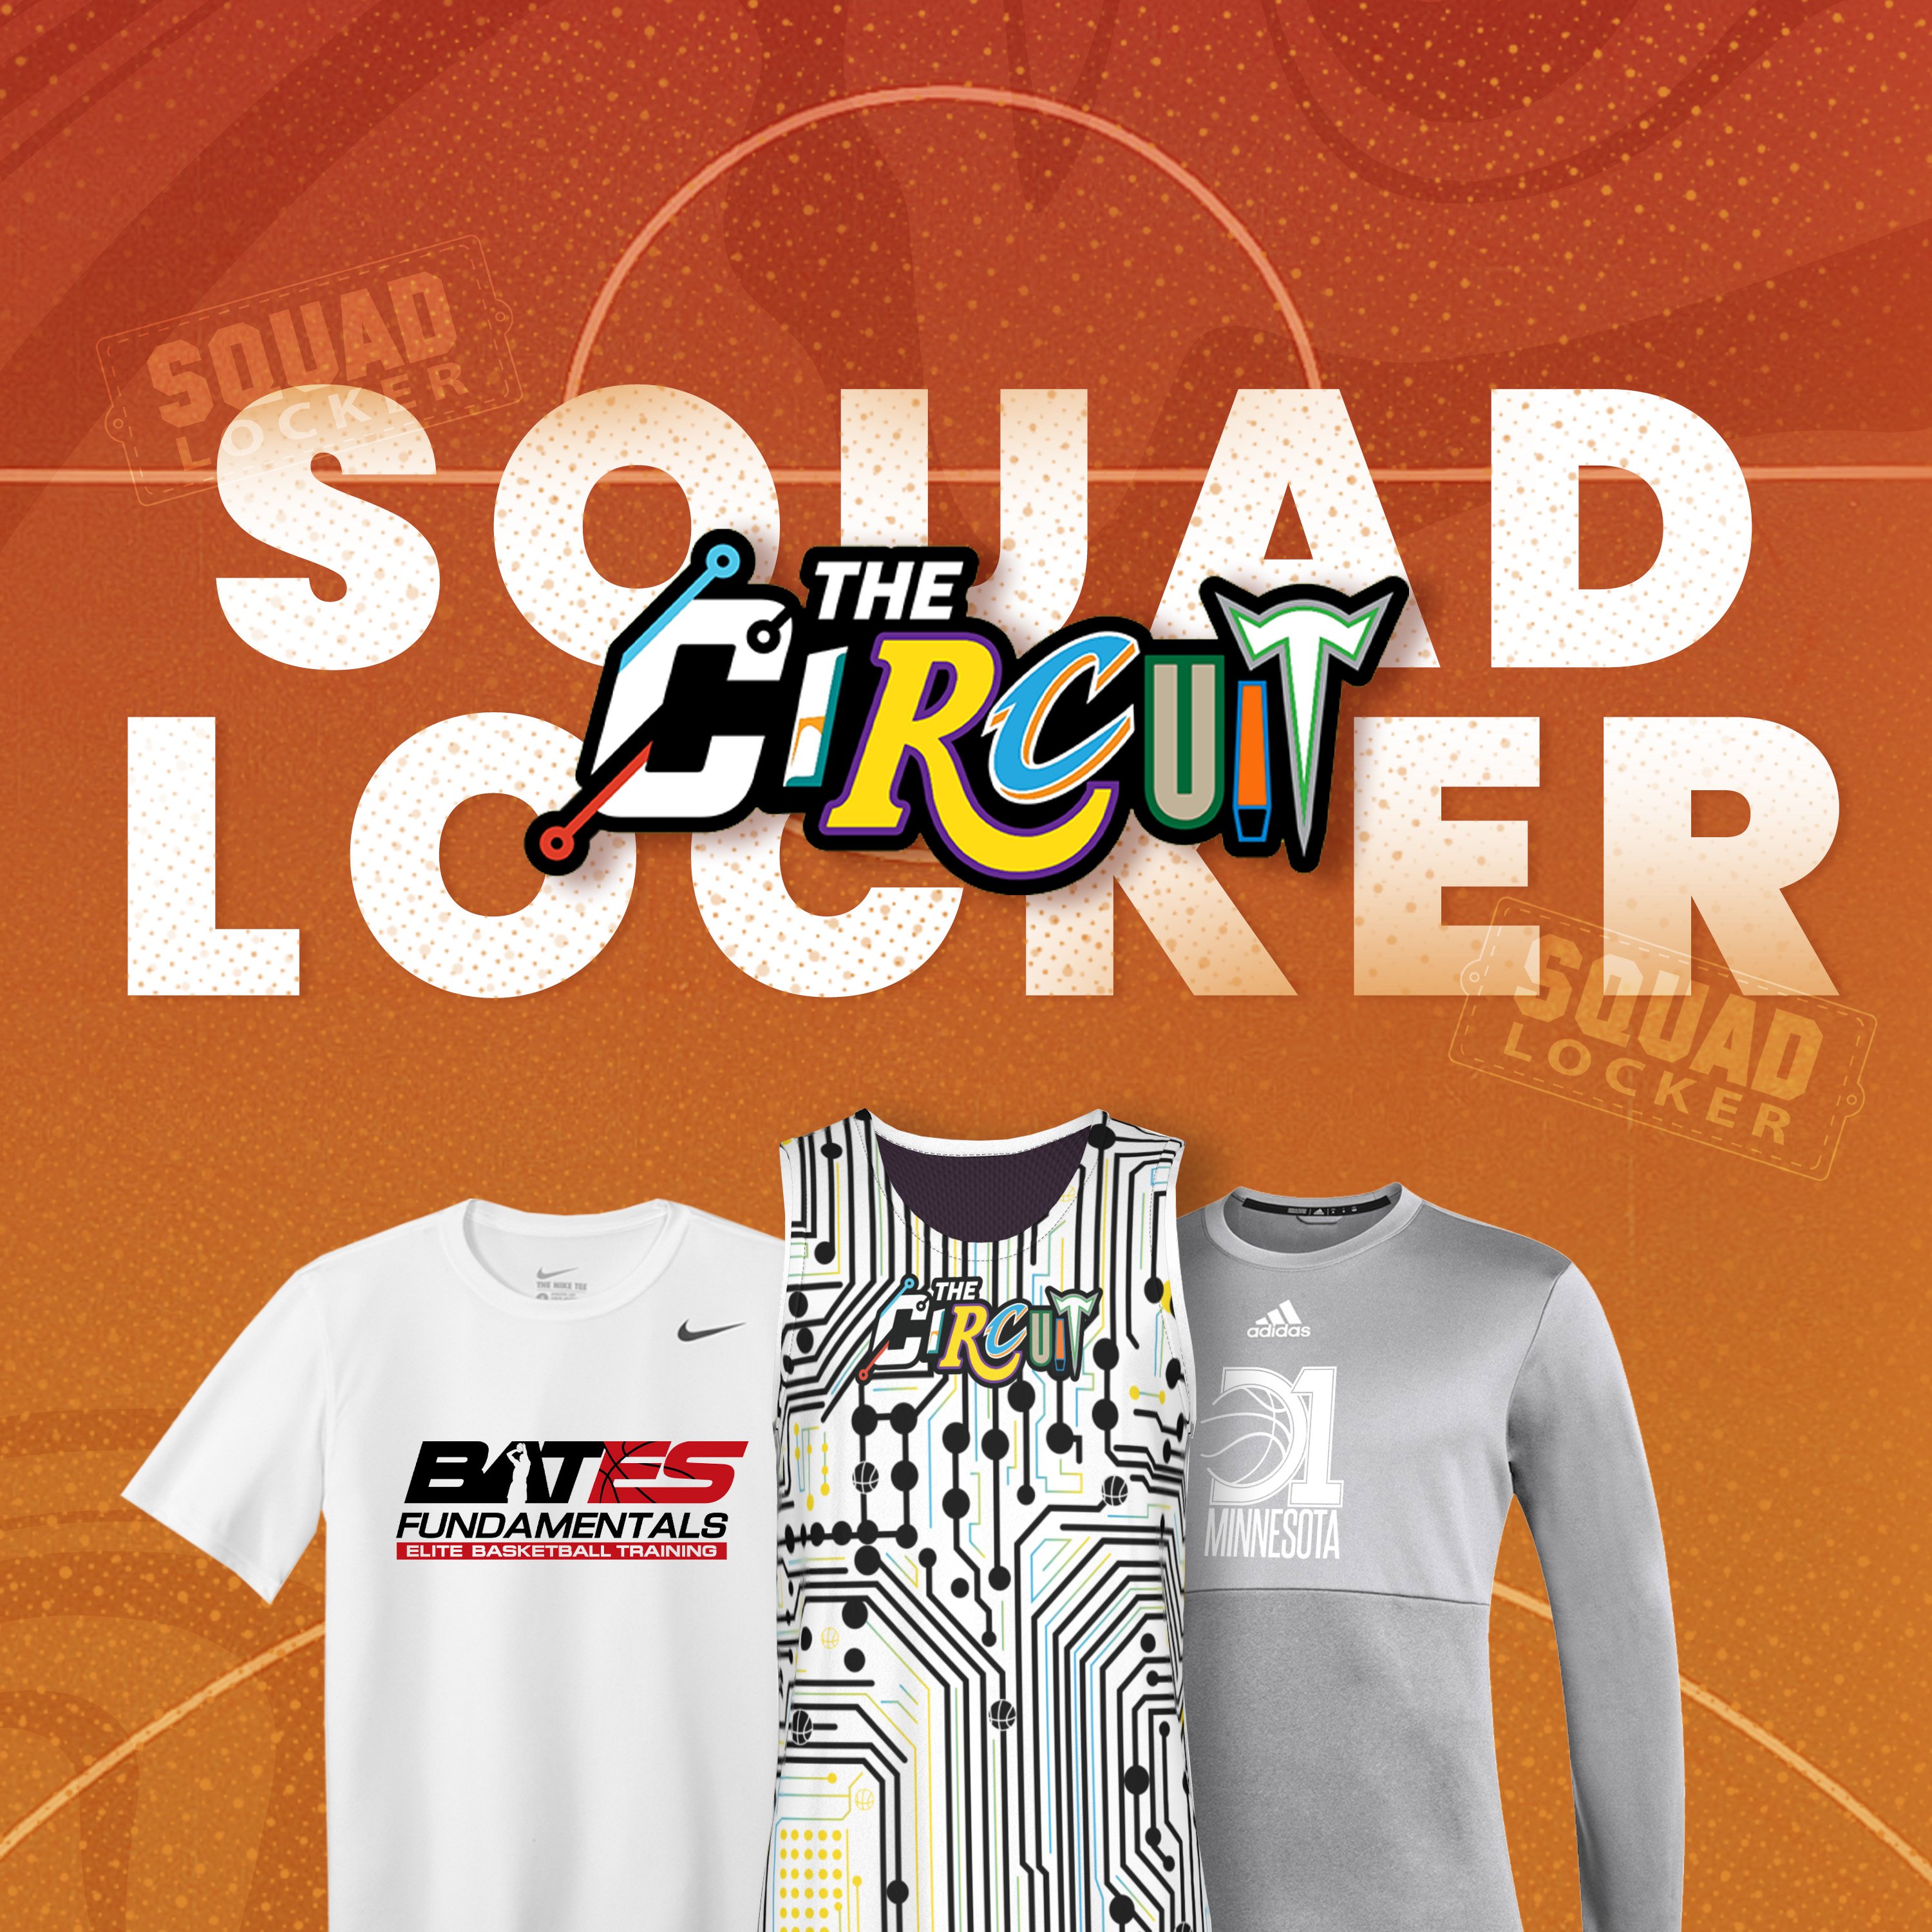 SquadLocker Teams Up with The Circuit as the...